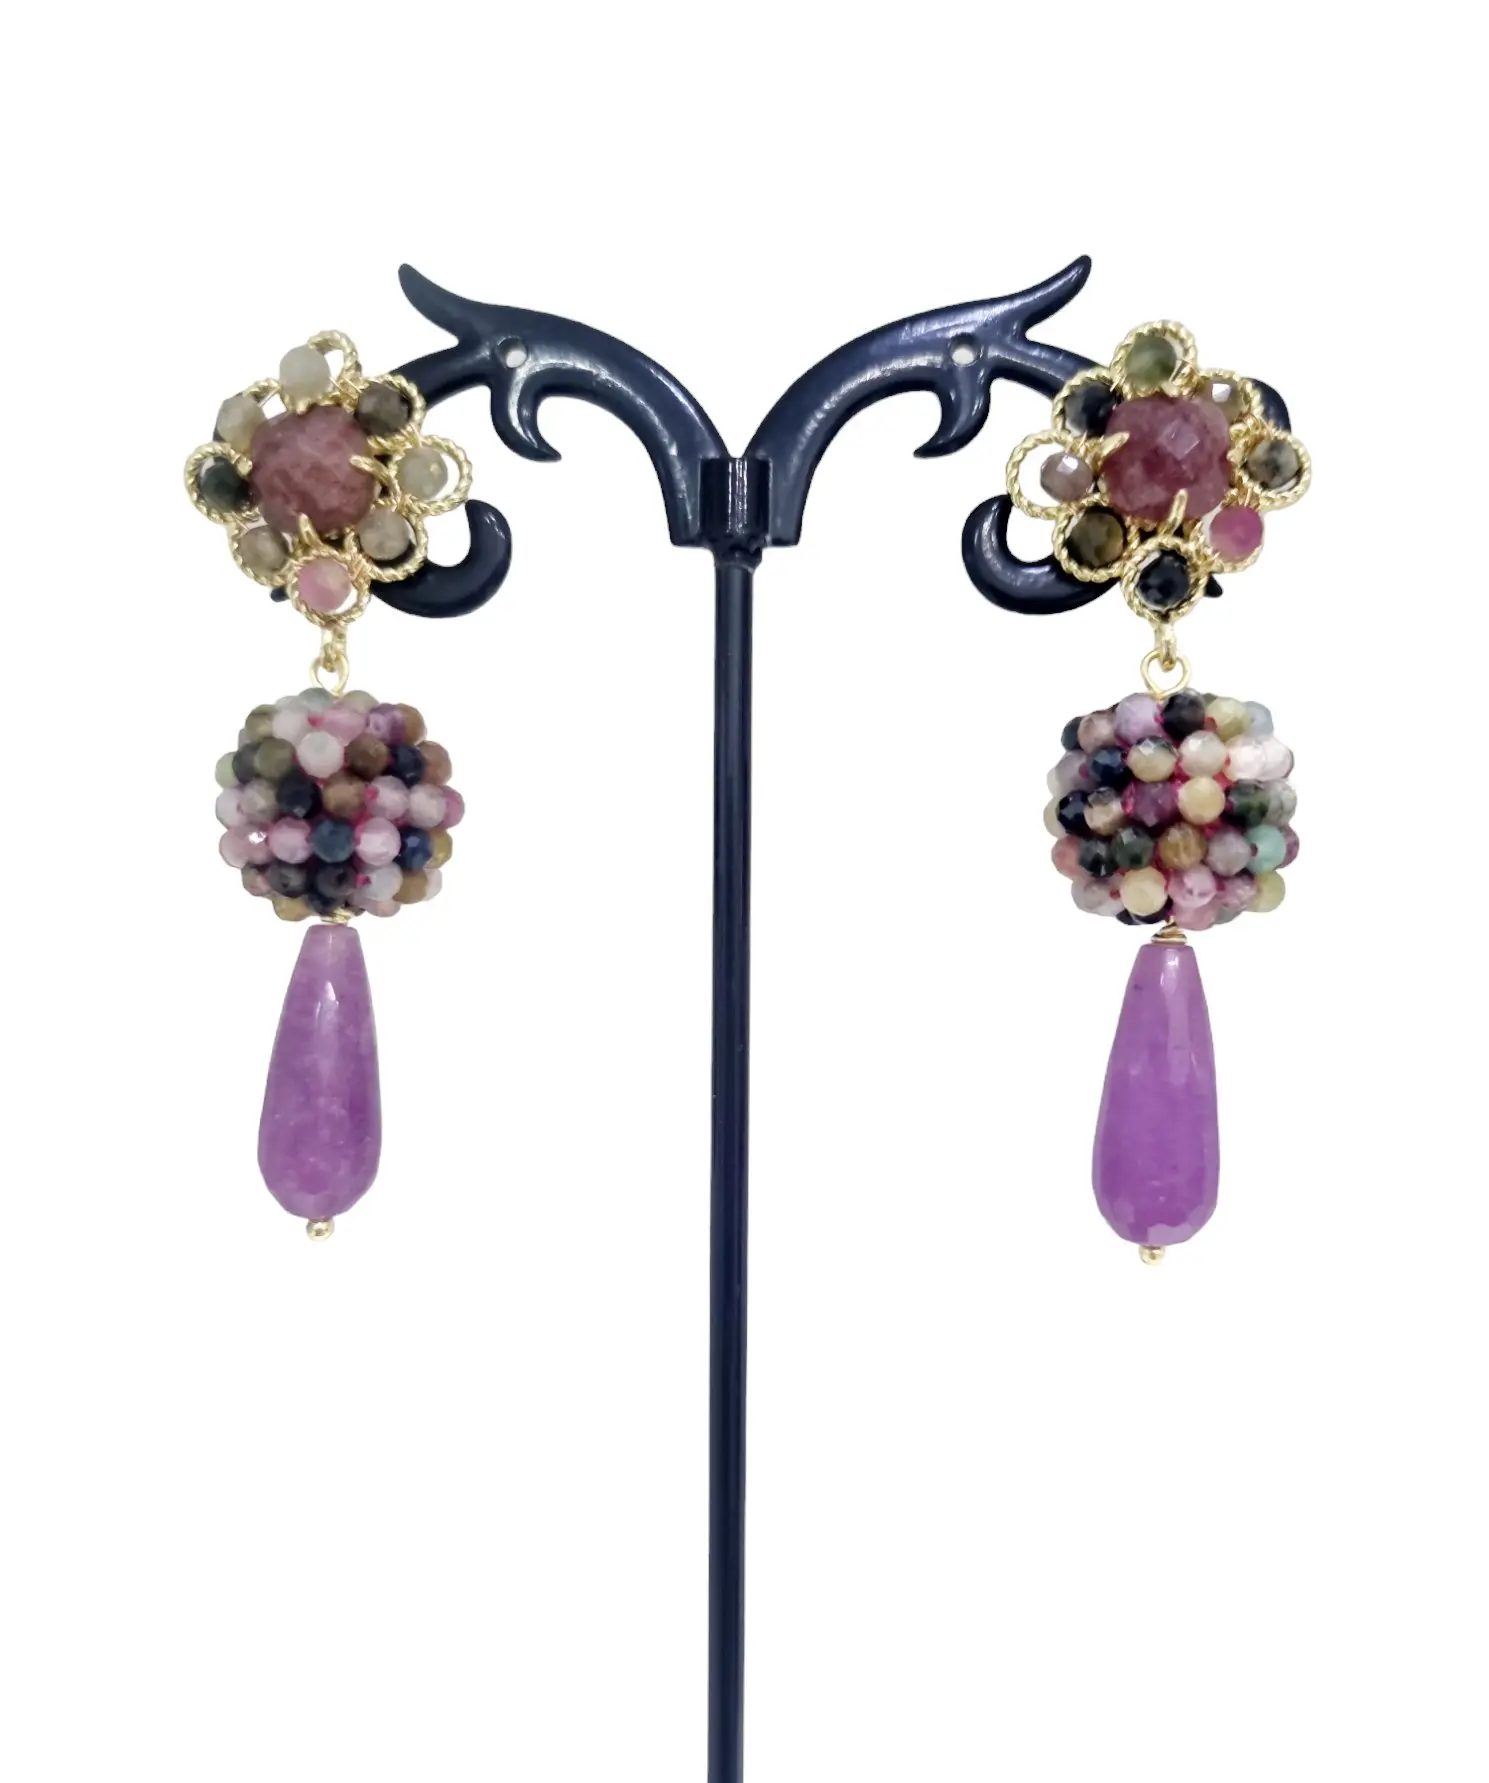 Agate and tourmaline earrings – Elegant and light design – Weight 7.1g Length 5cm